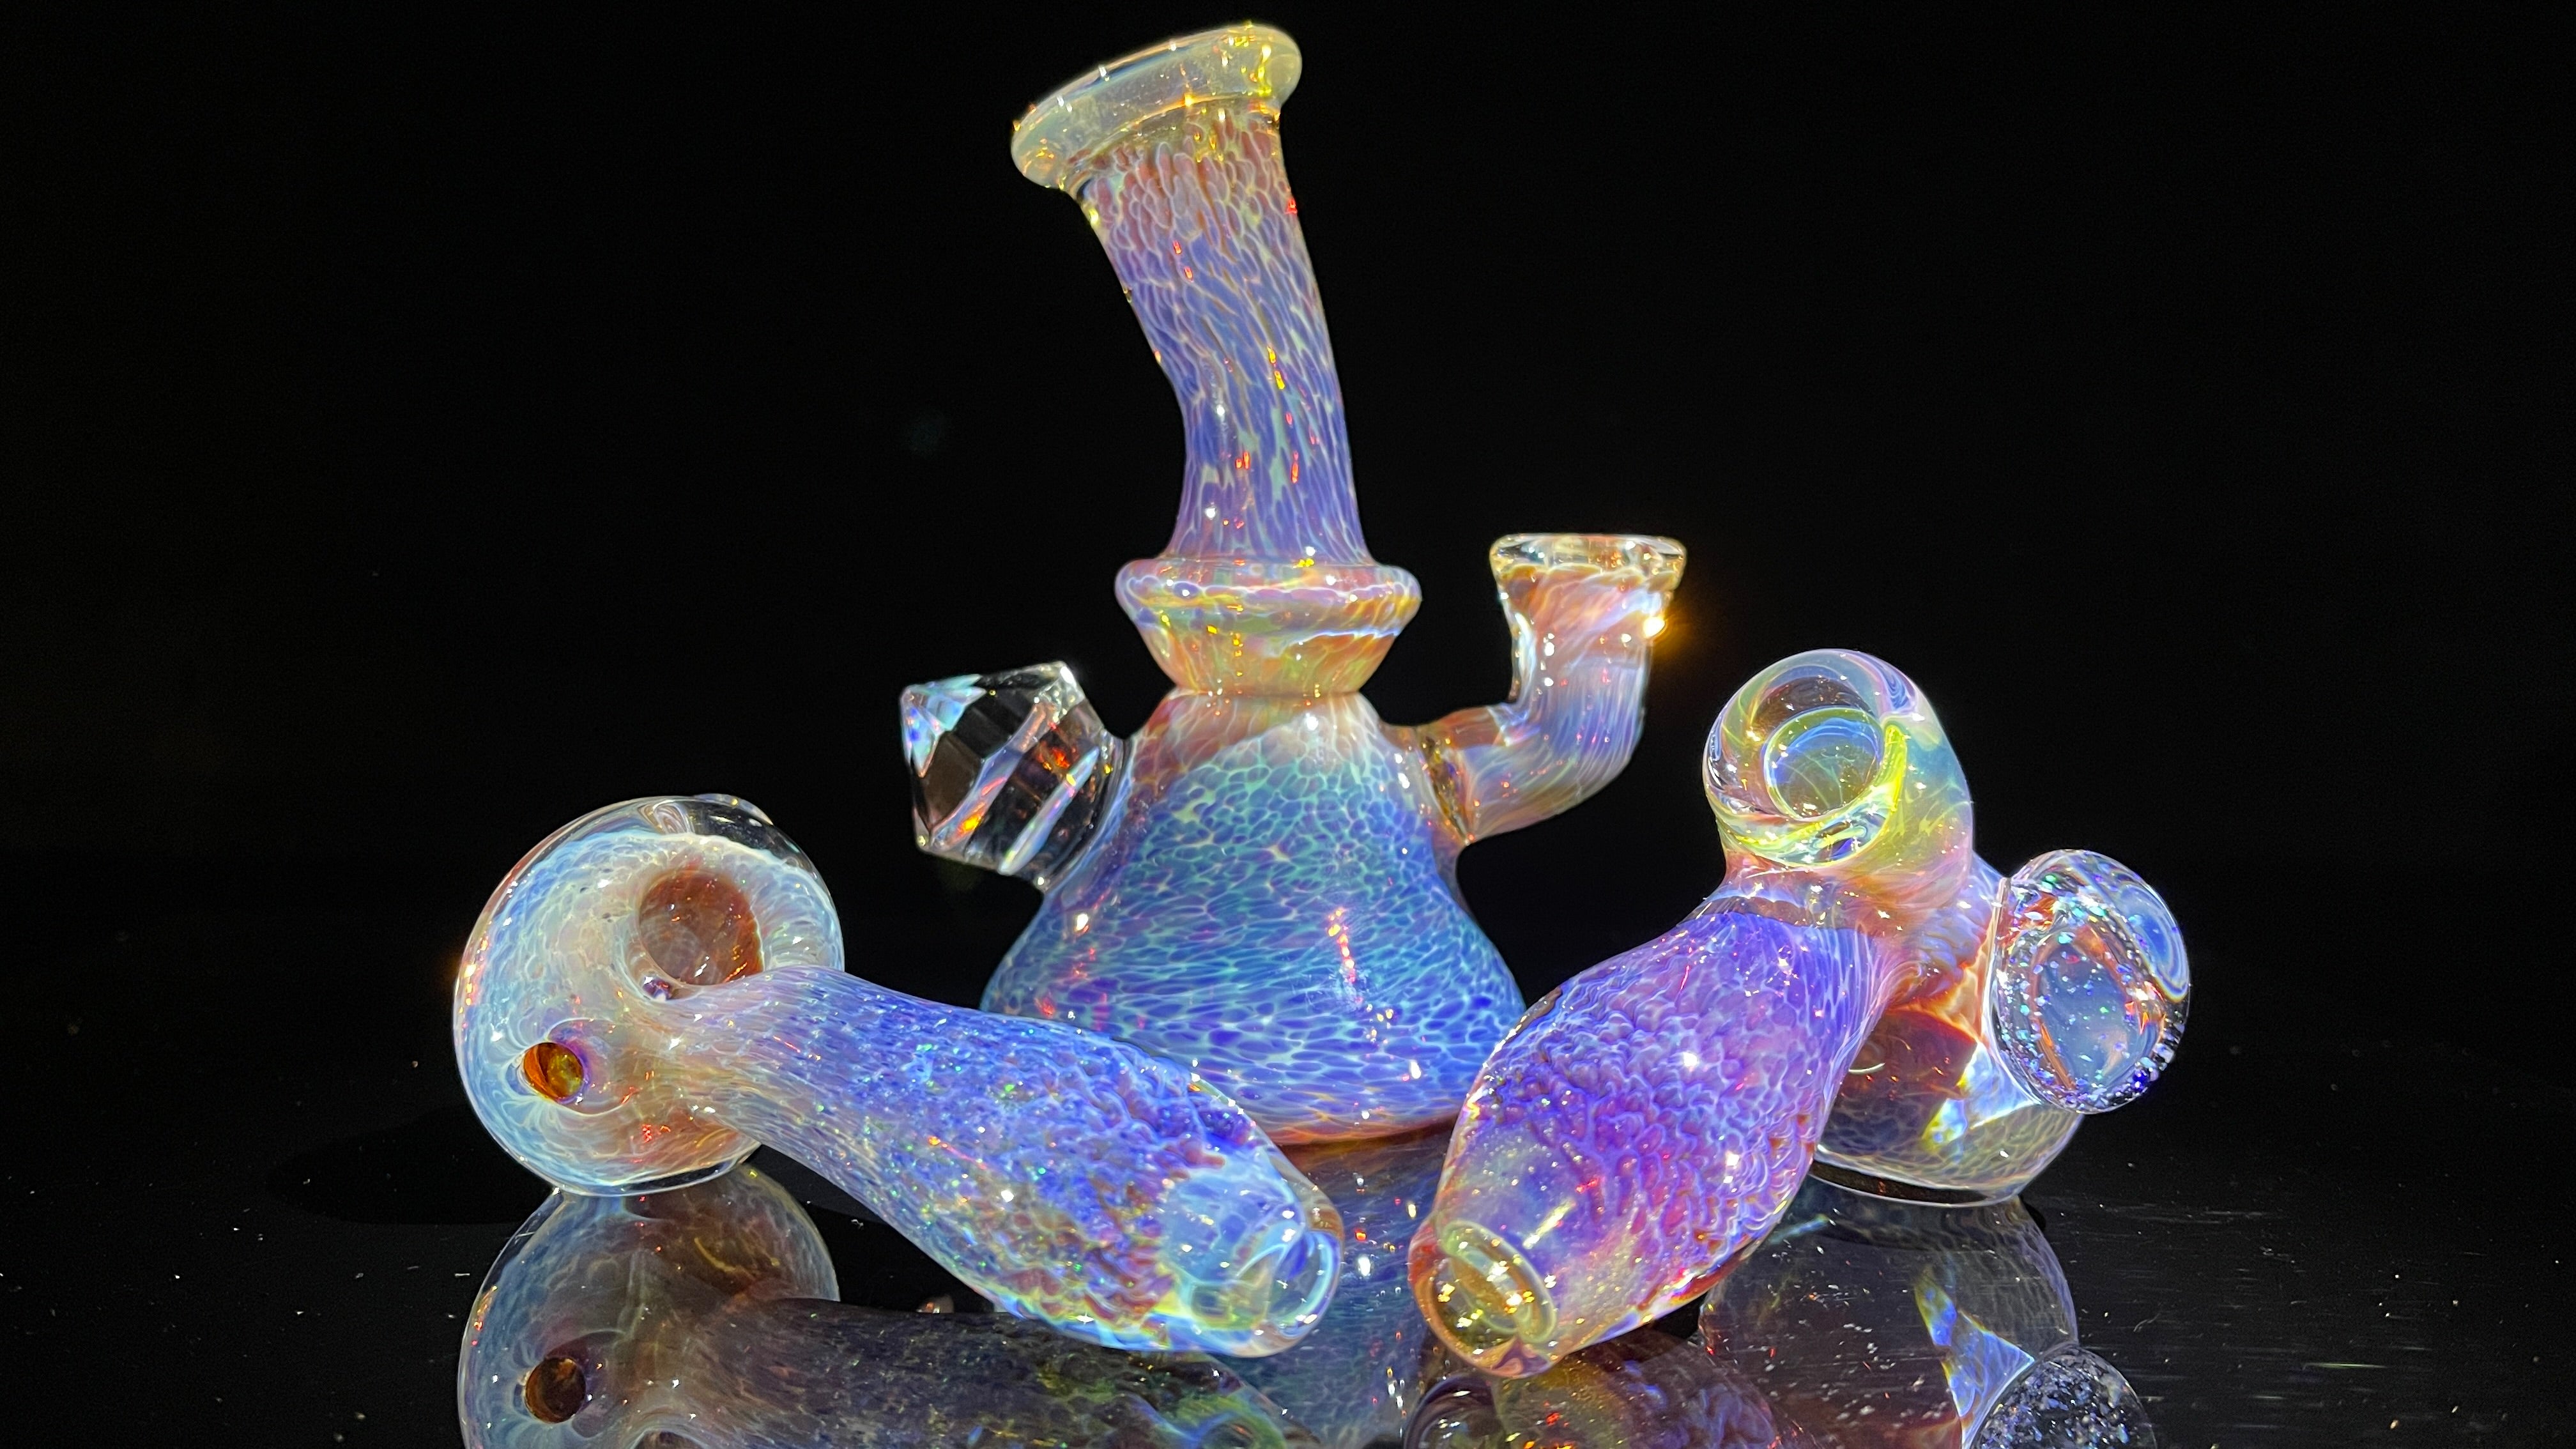 Cute Bubblers for Sale, Water Pipes